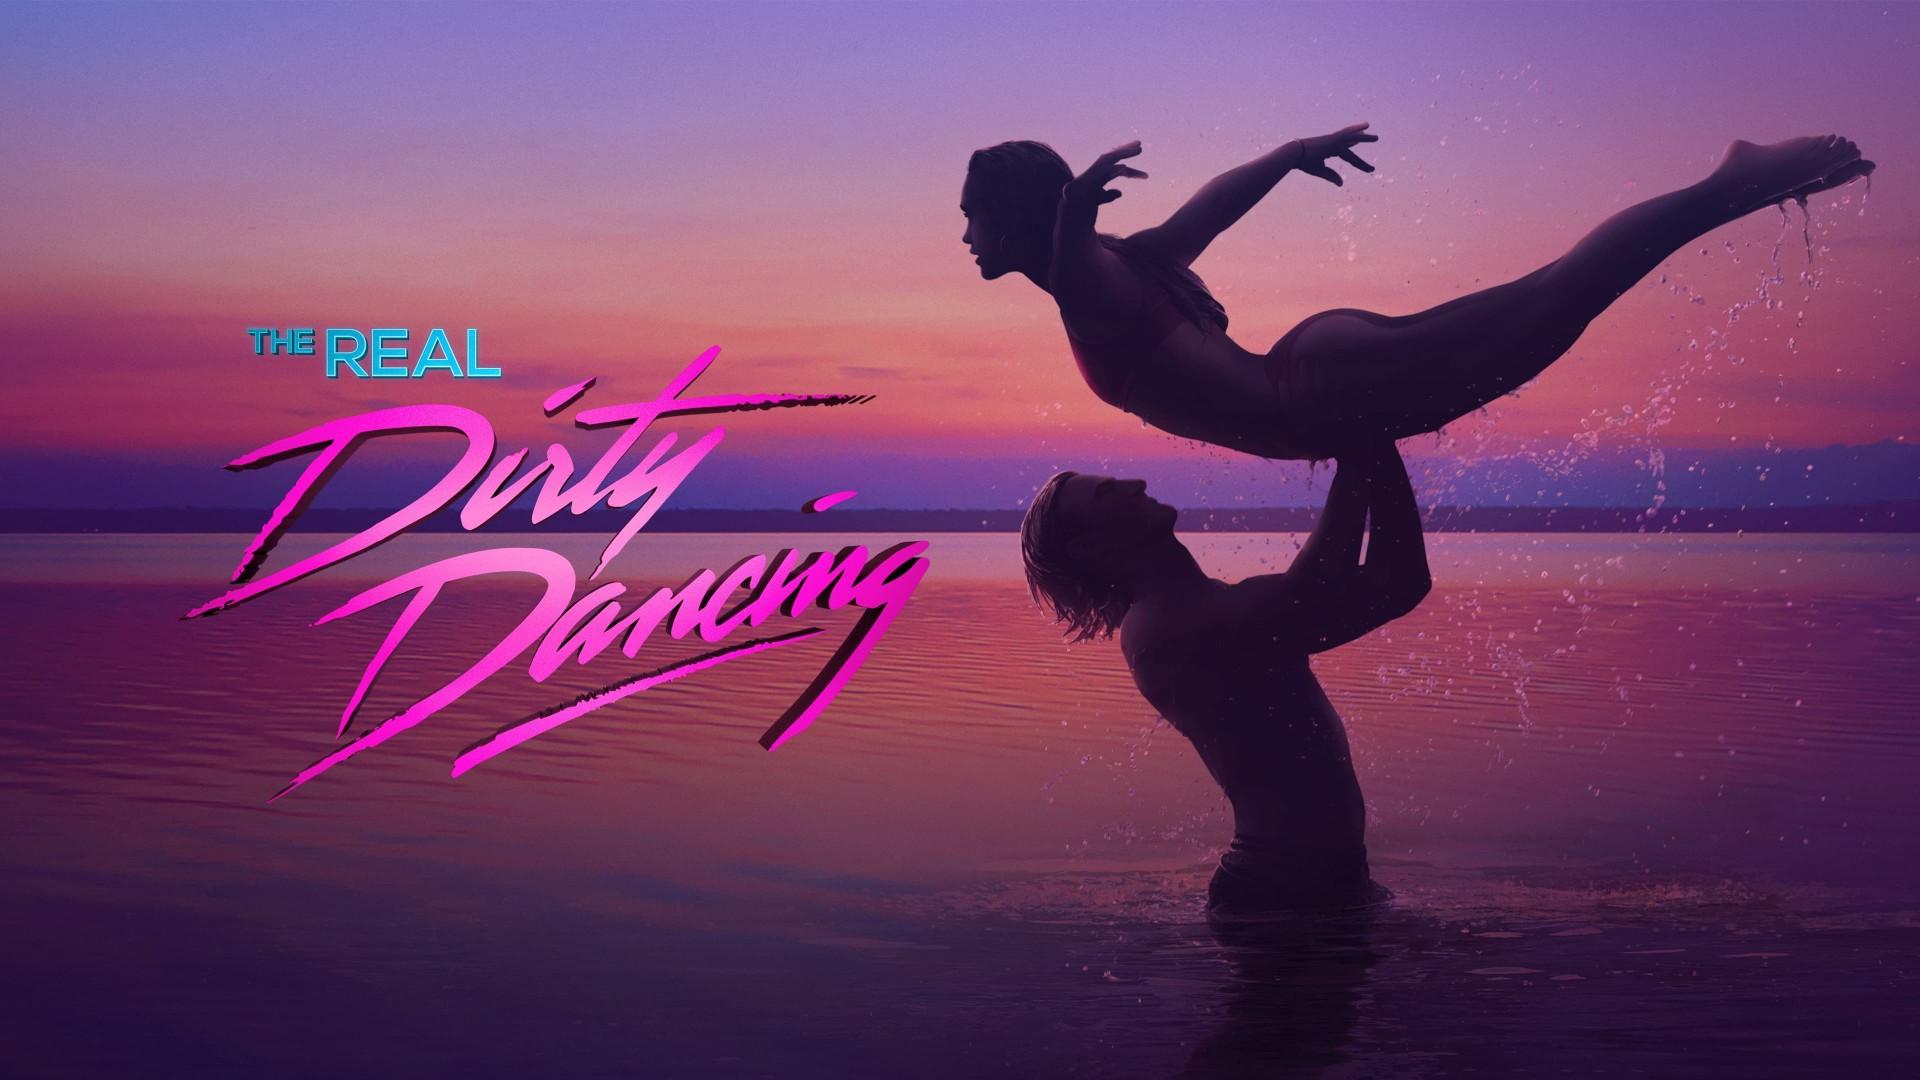 The Real Dirty Dancing (US)